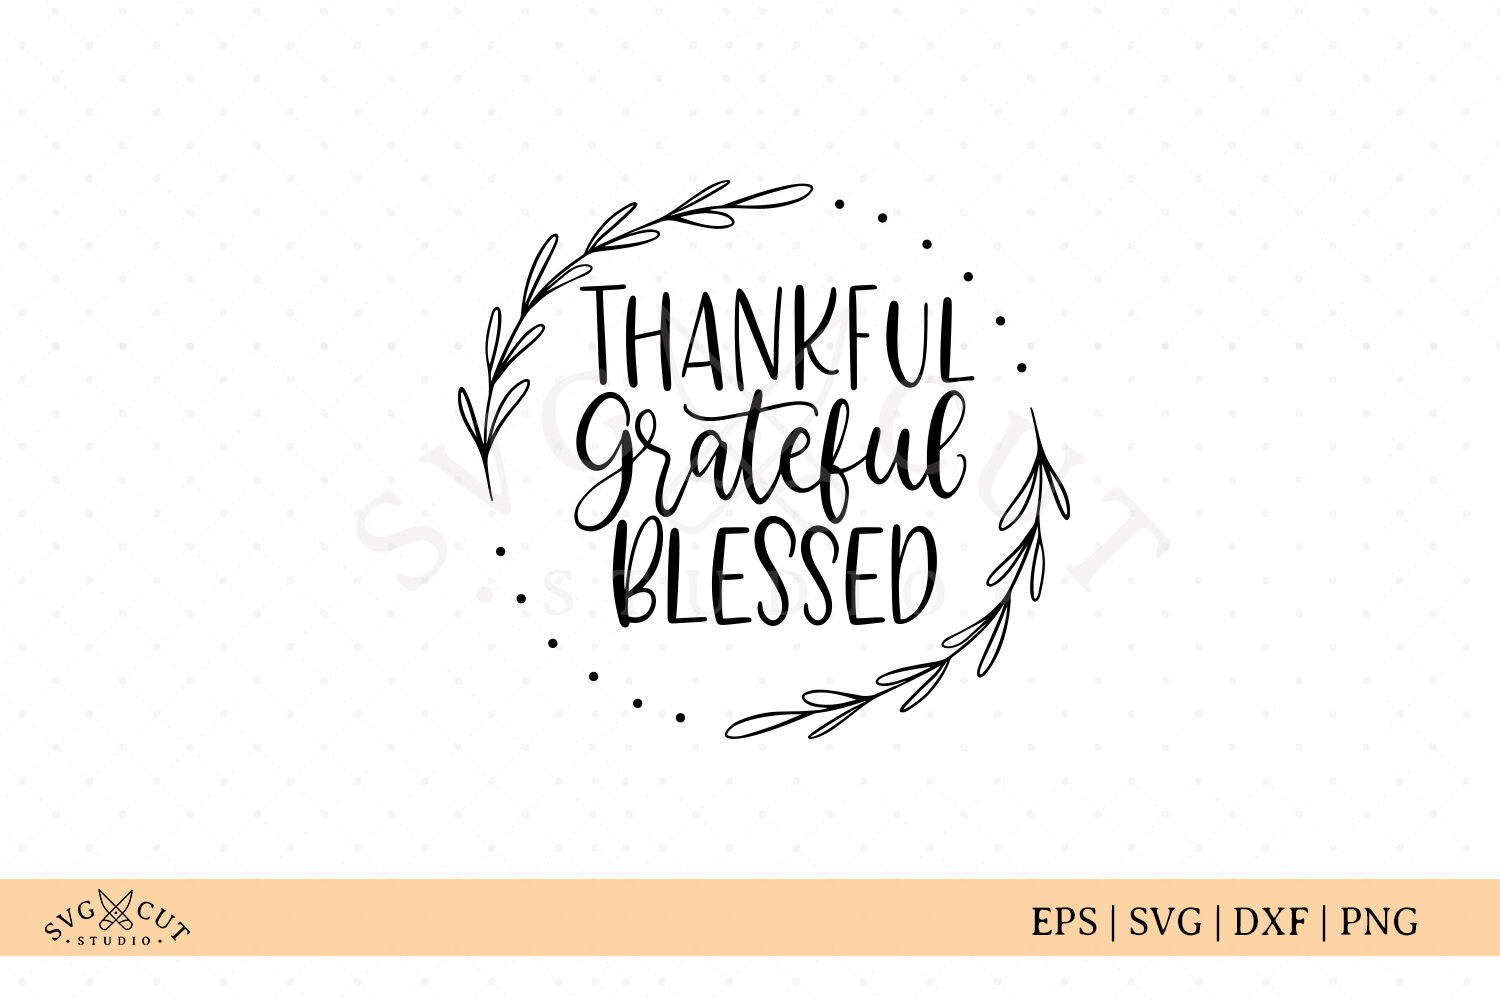 Download Thankful Grateful Blessed Svg Files By Svg Cut Studio Thehungryjpeg Com SVG, PNG, EPS, DXF File